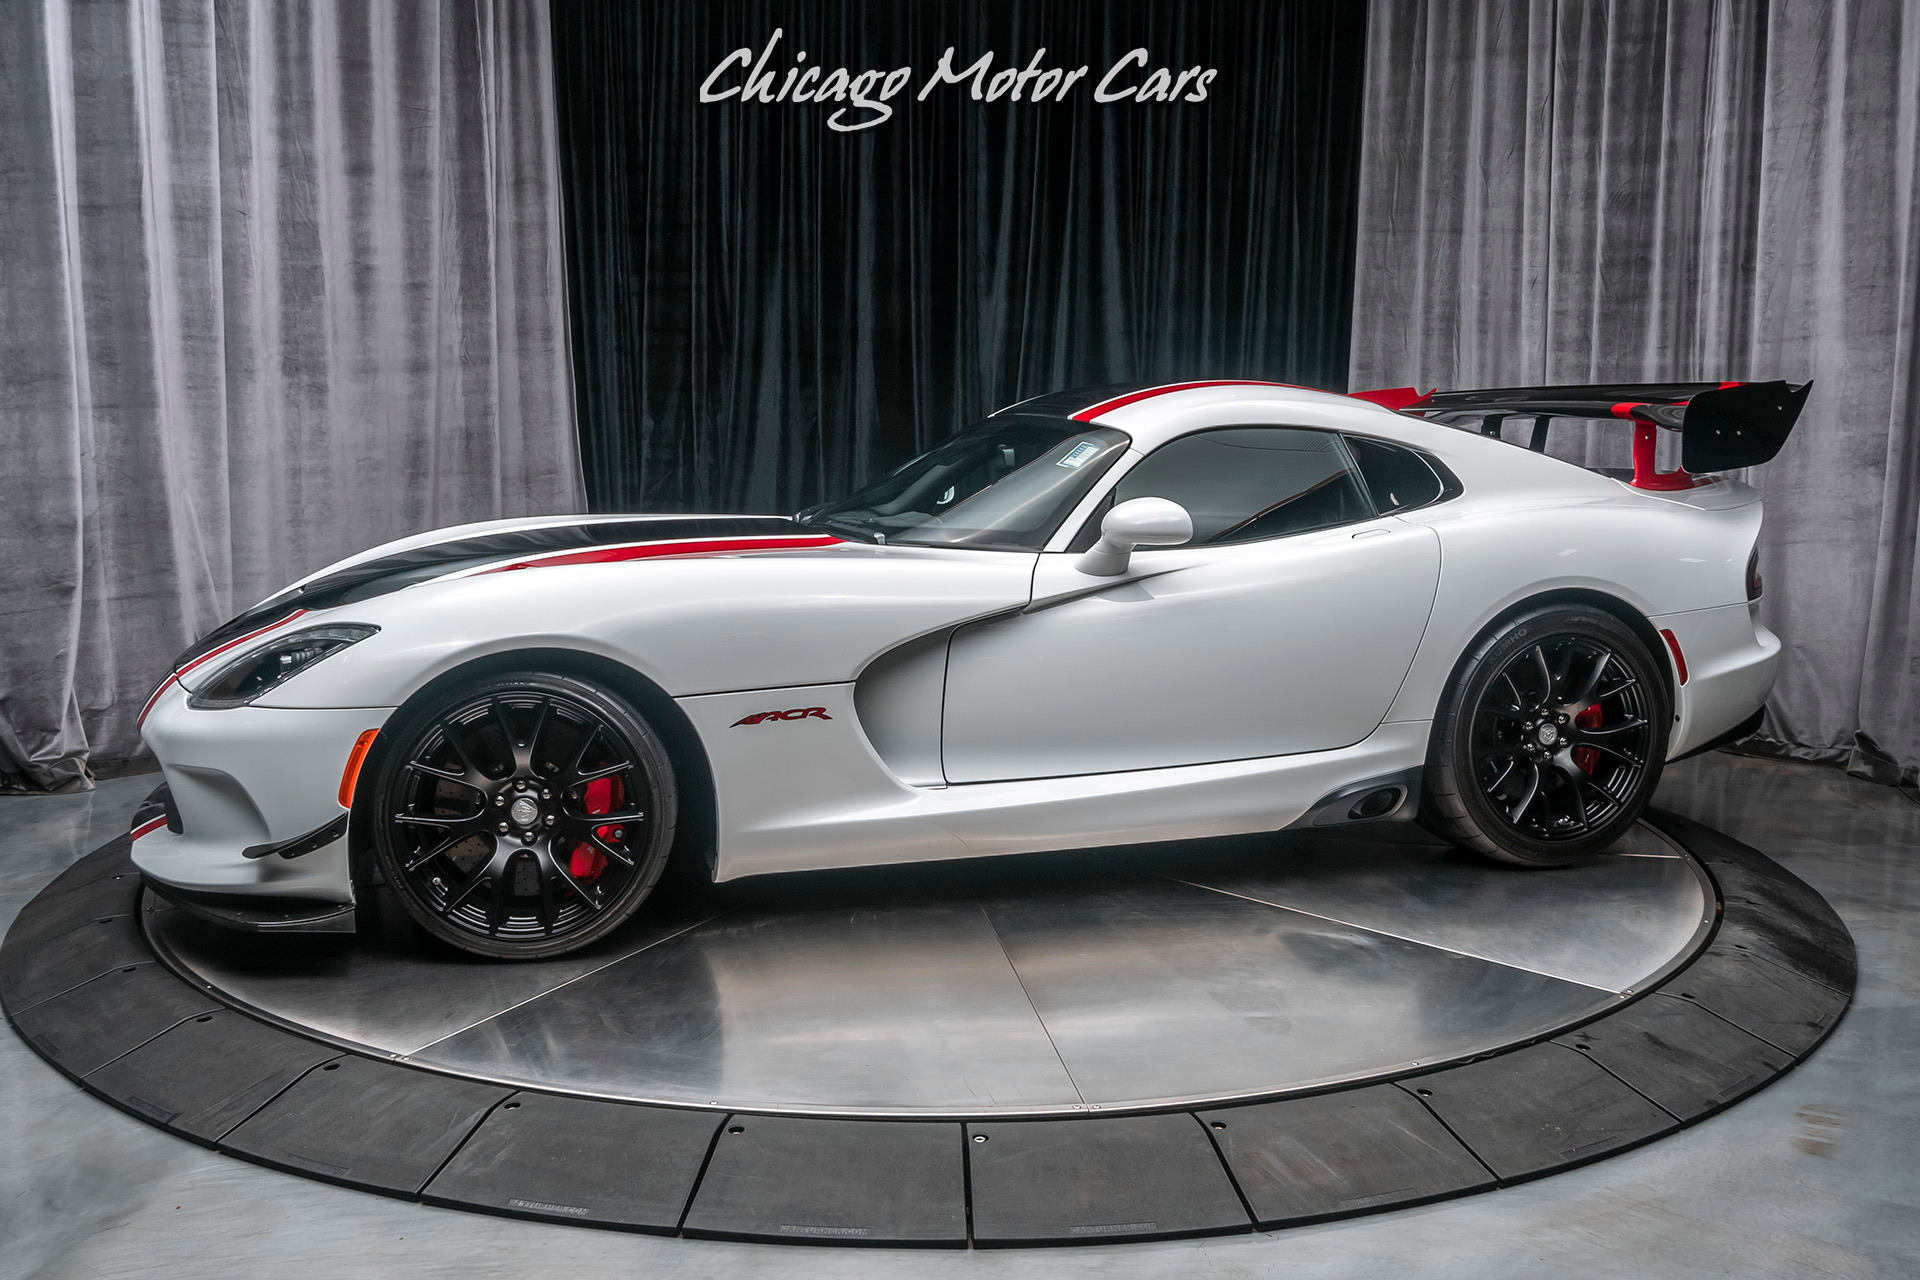 Used-2016-Dodge-Viper-ACR-Coupe-ONLY-1700-MILES